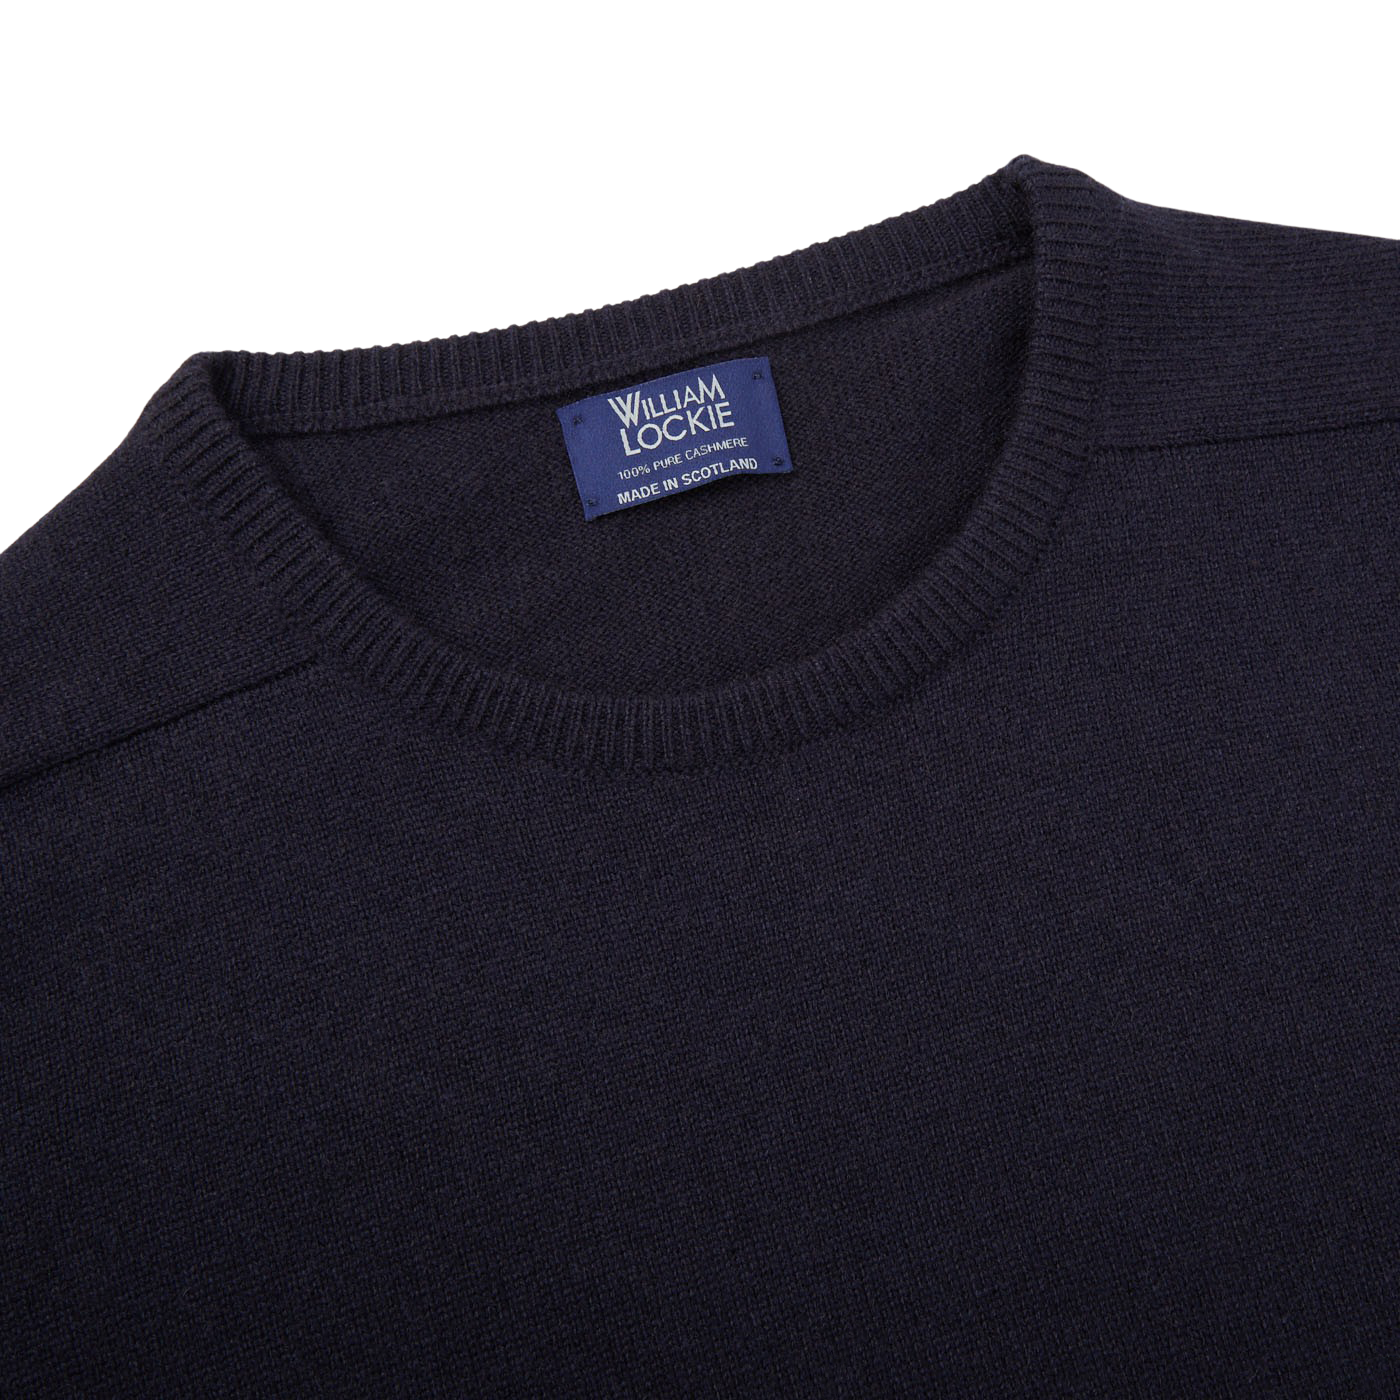 A William Lockie navy crewneck cashmere sweater with a label on the front.